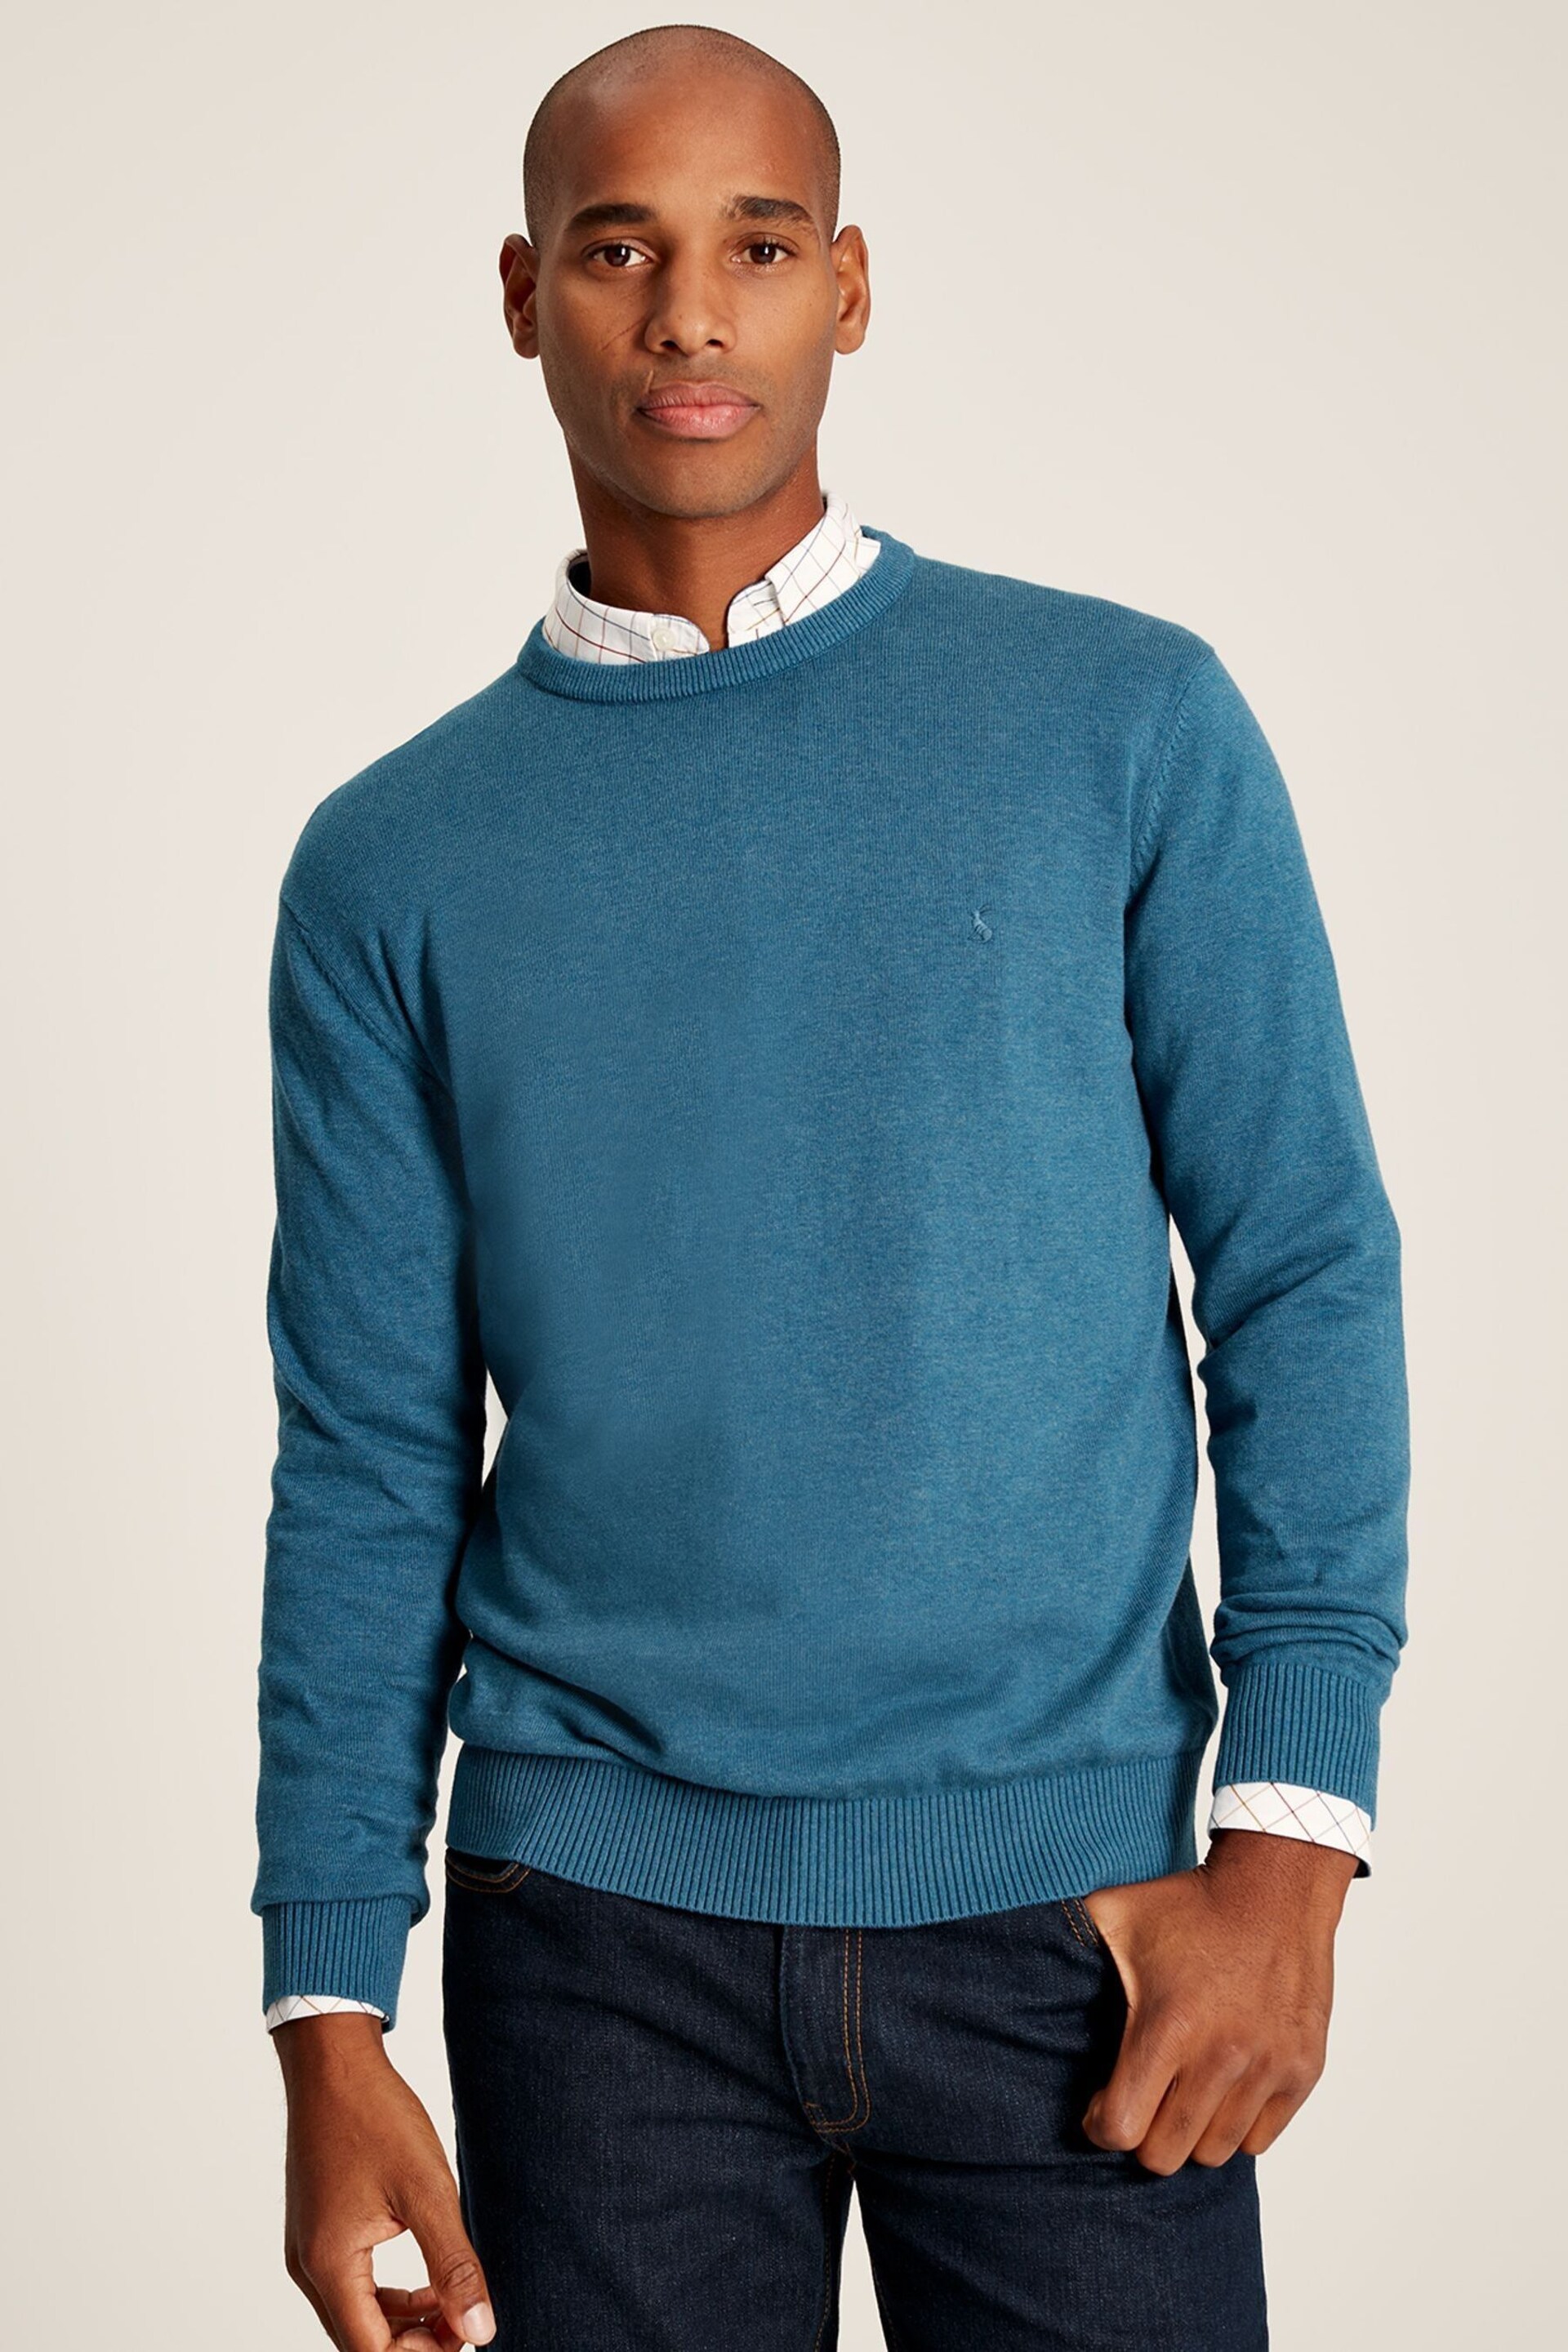 Joules Jarvis Blue Cotton Crew Neck Jumper - Image 1 of 6